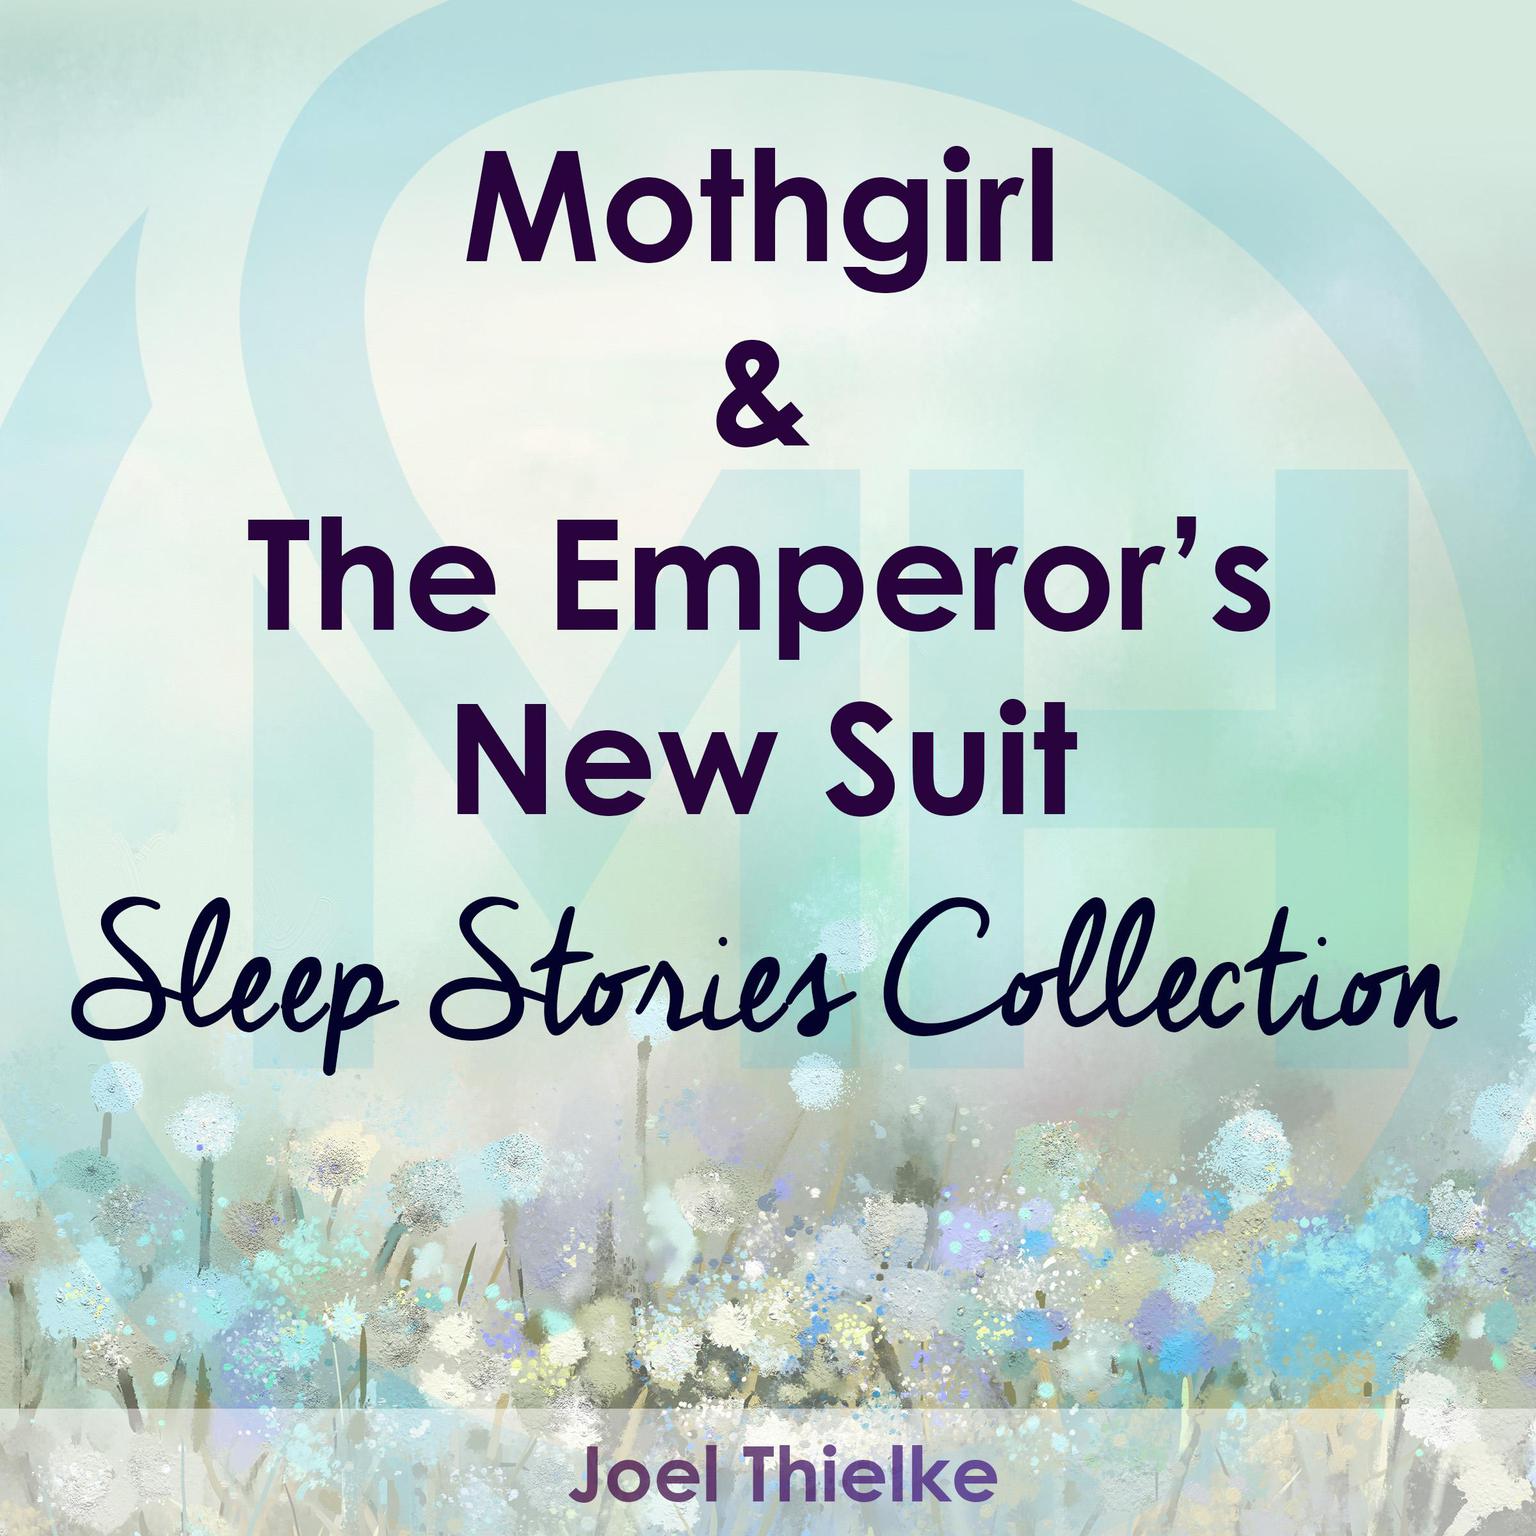 Mothgirl & The Emperors New Suit - Sleep Stories Collection Audiobook, by Joel Thielke